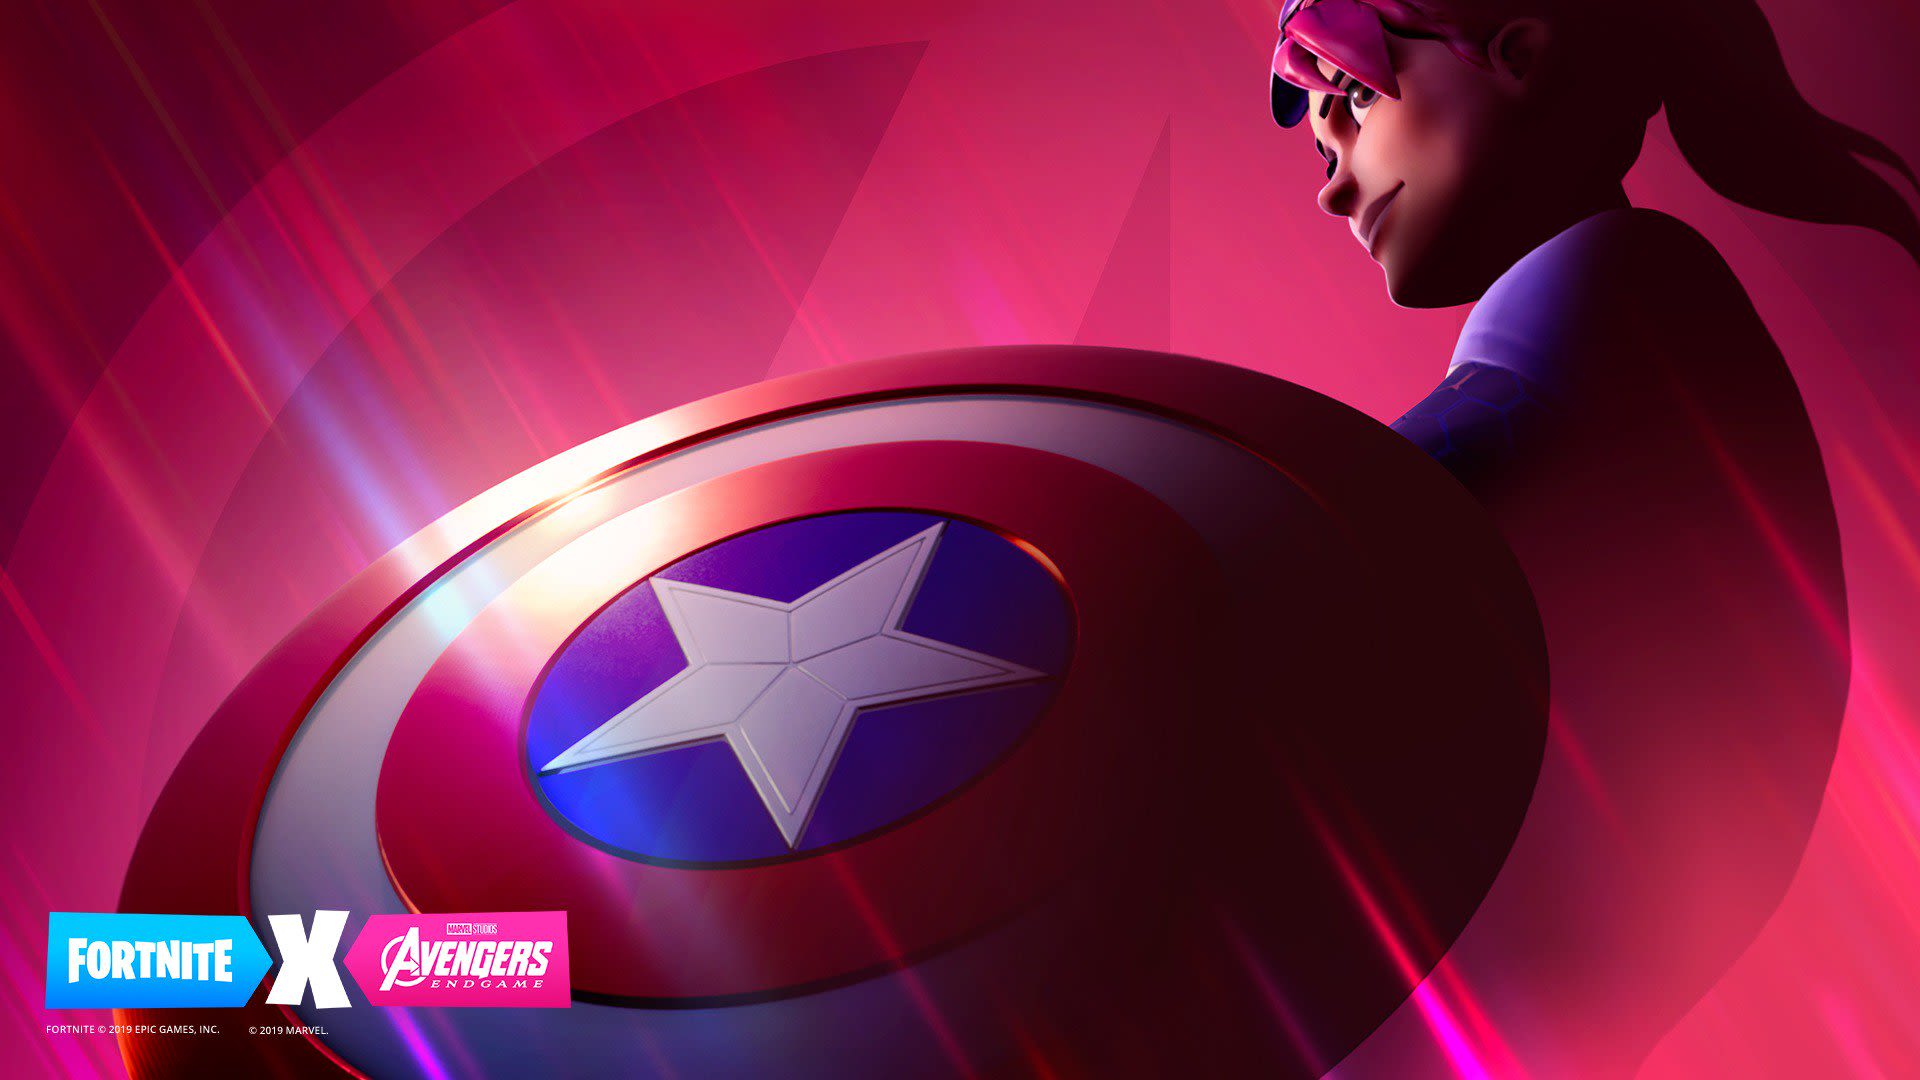 Take out crowd niece Fortnite' and 'Avengers: Endgame' are teaming up for a crossover event | CNN